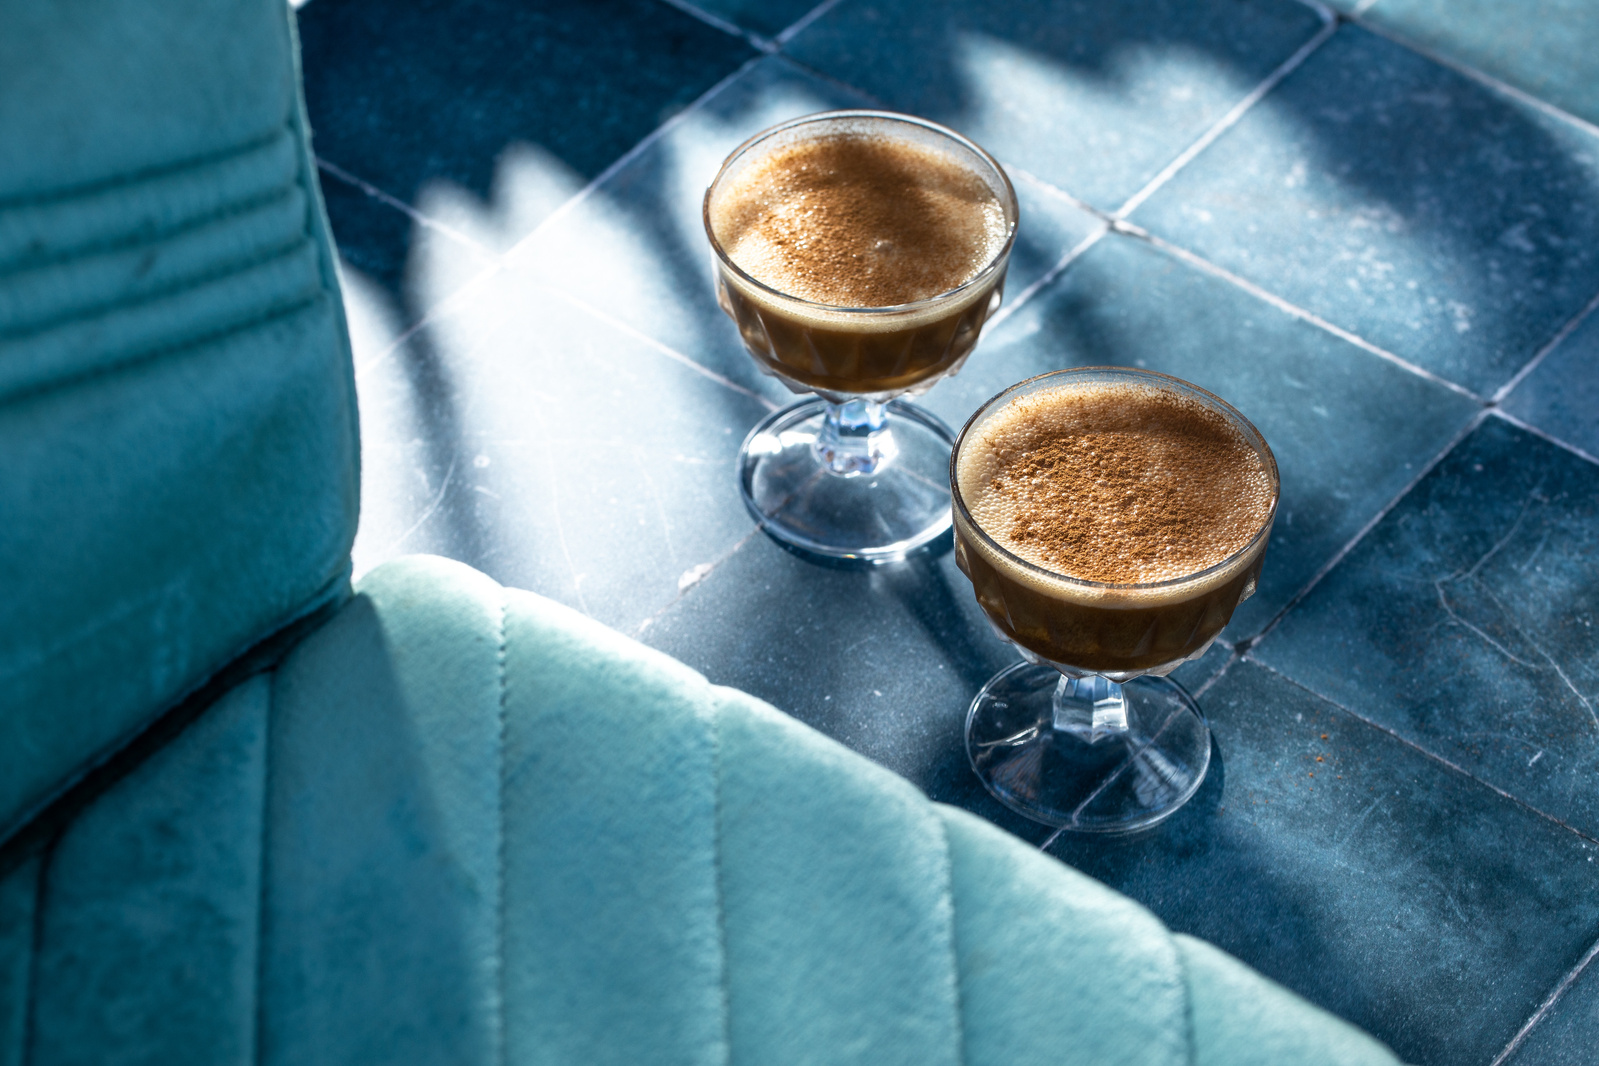 Restaurant photography with two espresso martinis on a teal tile surface next to a lighter teal seat with dramatic hard light and shadows